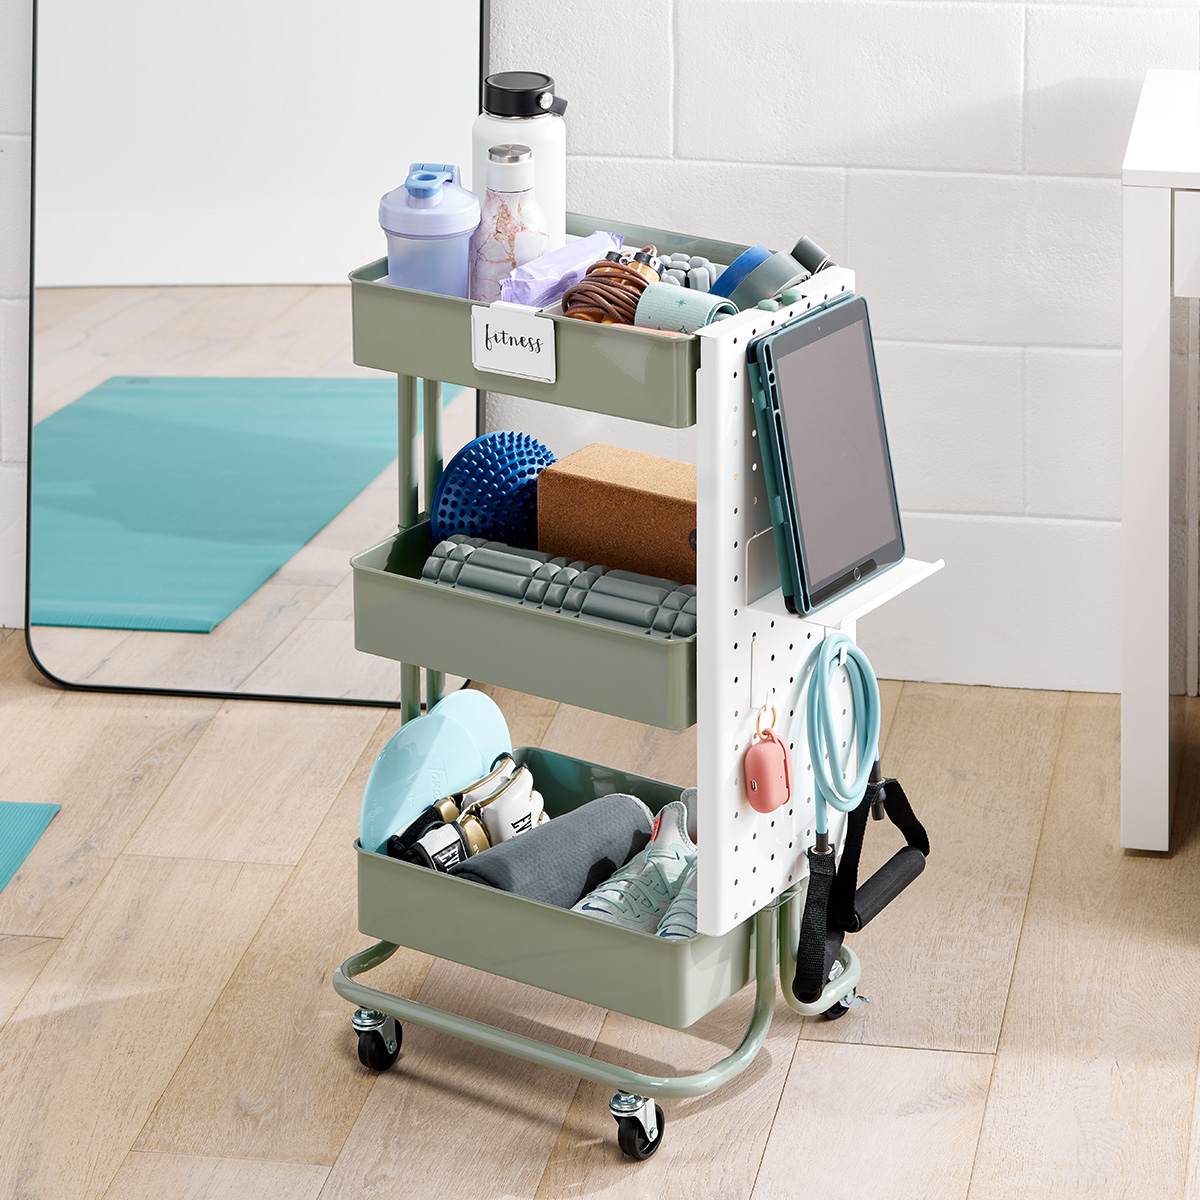 https://www.containerstore.com/catalogimages/450210/10079693g_3-tier_cart_fitness_kit.jpg